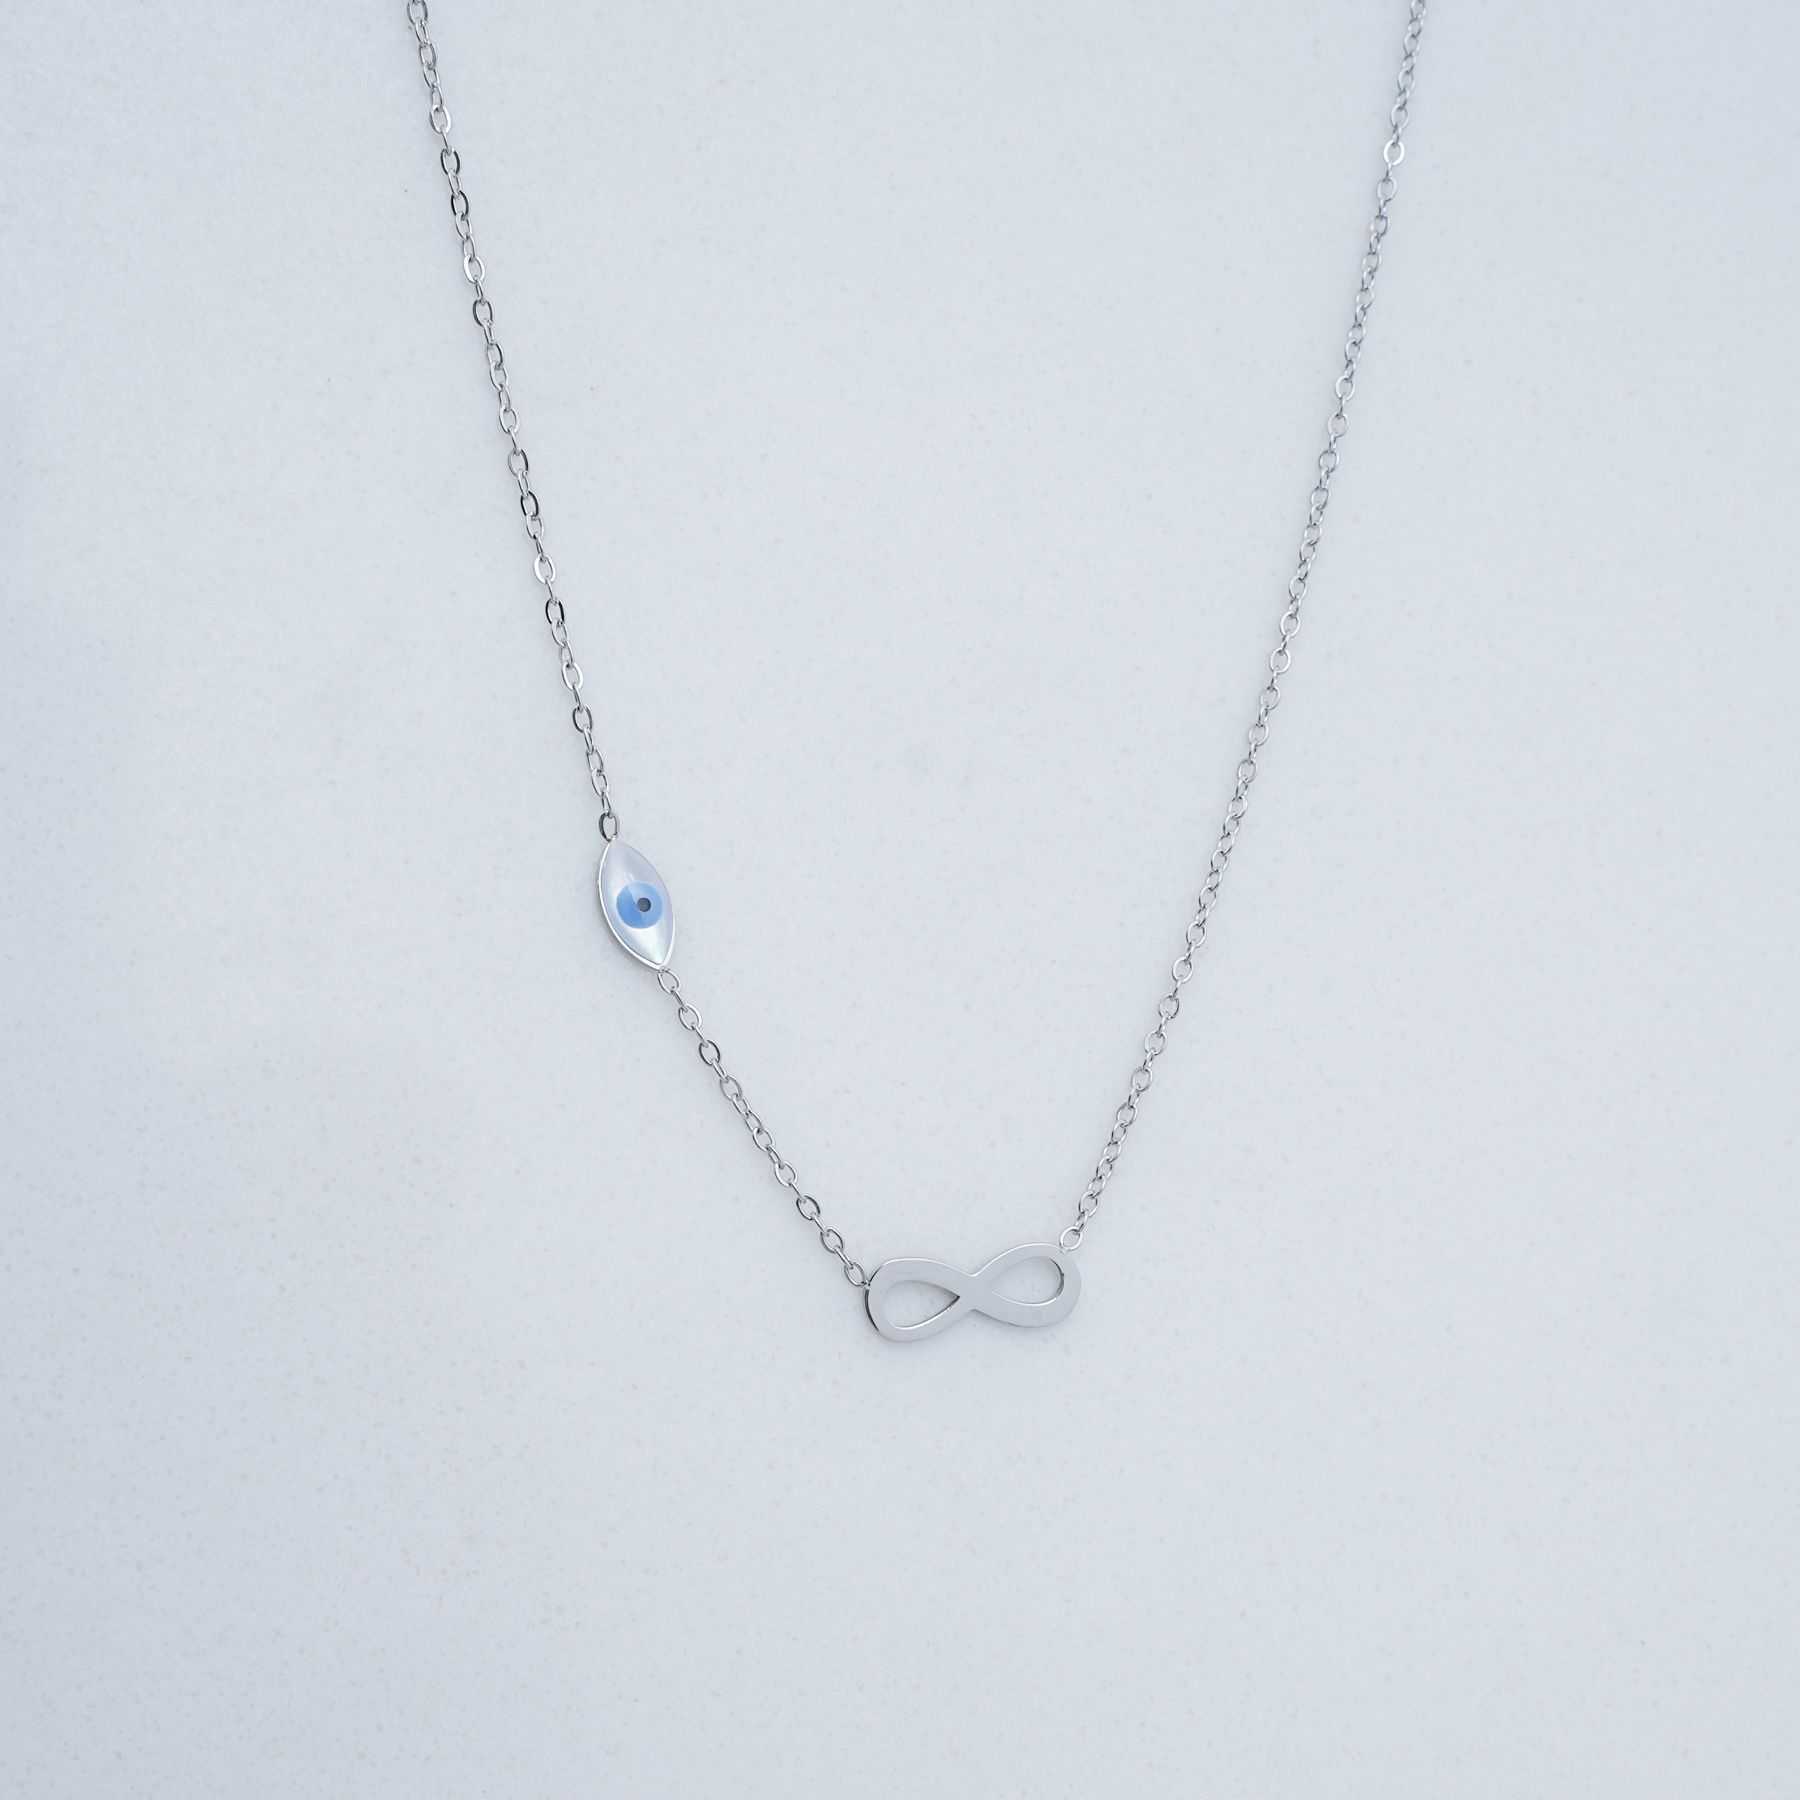 INFINITELY NECKLACE - SILVER 